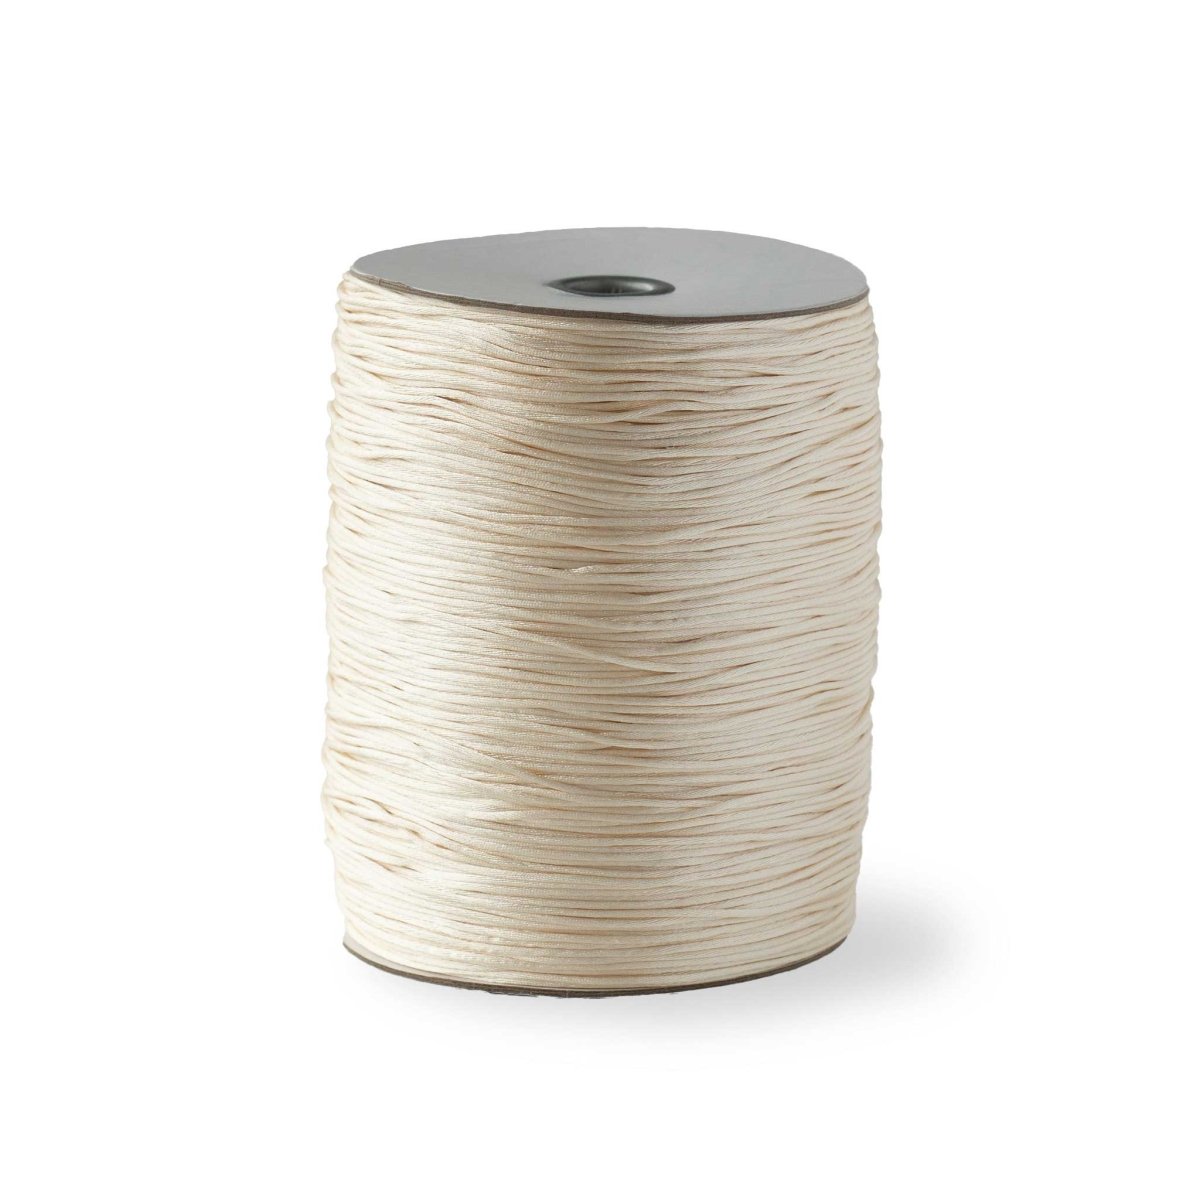 Cording Nylon Cord 1.5mm - Spools Wheat from Cara & Co Craft Supply